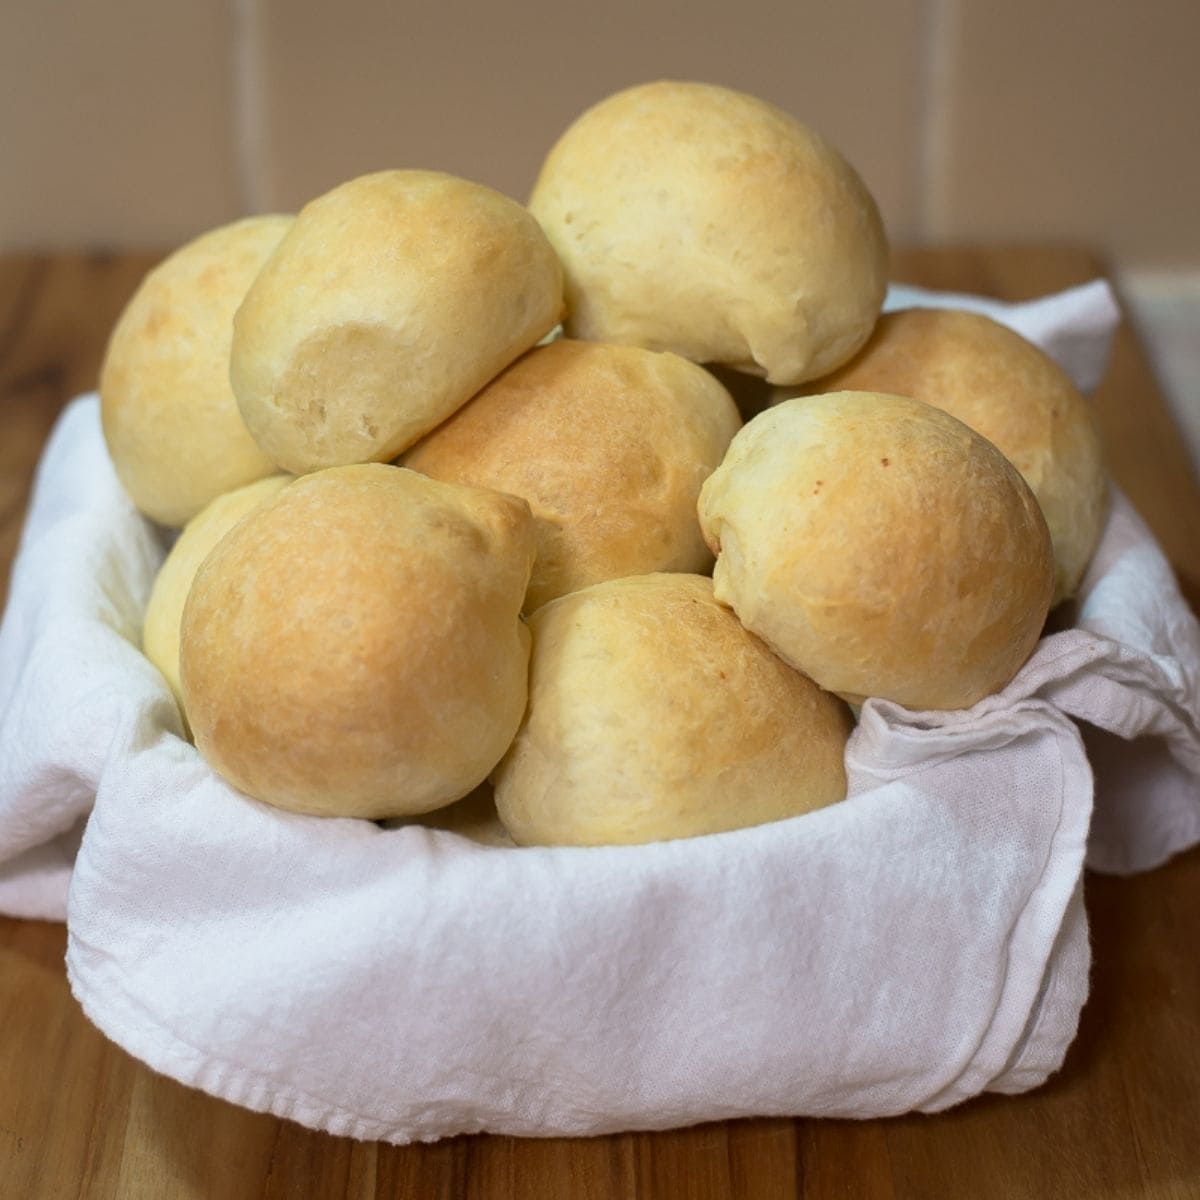 A towel lined basket filled with homemade slider buns.